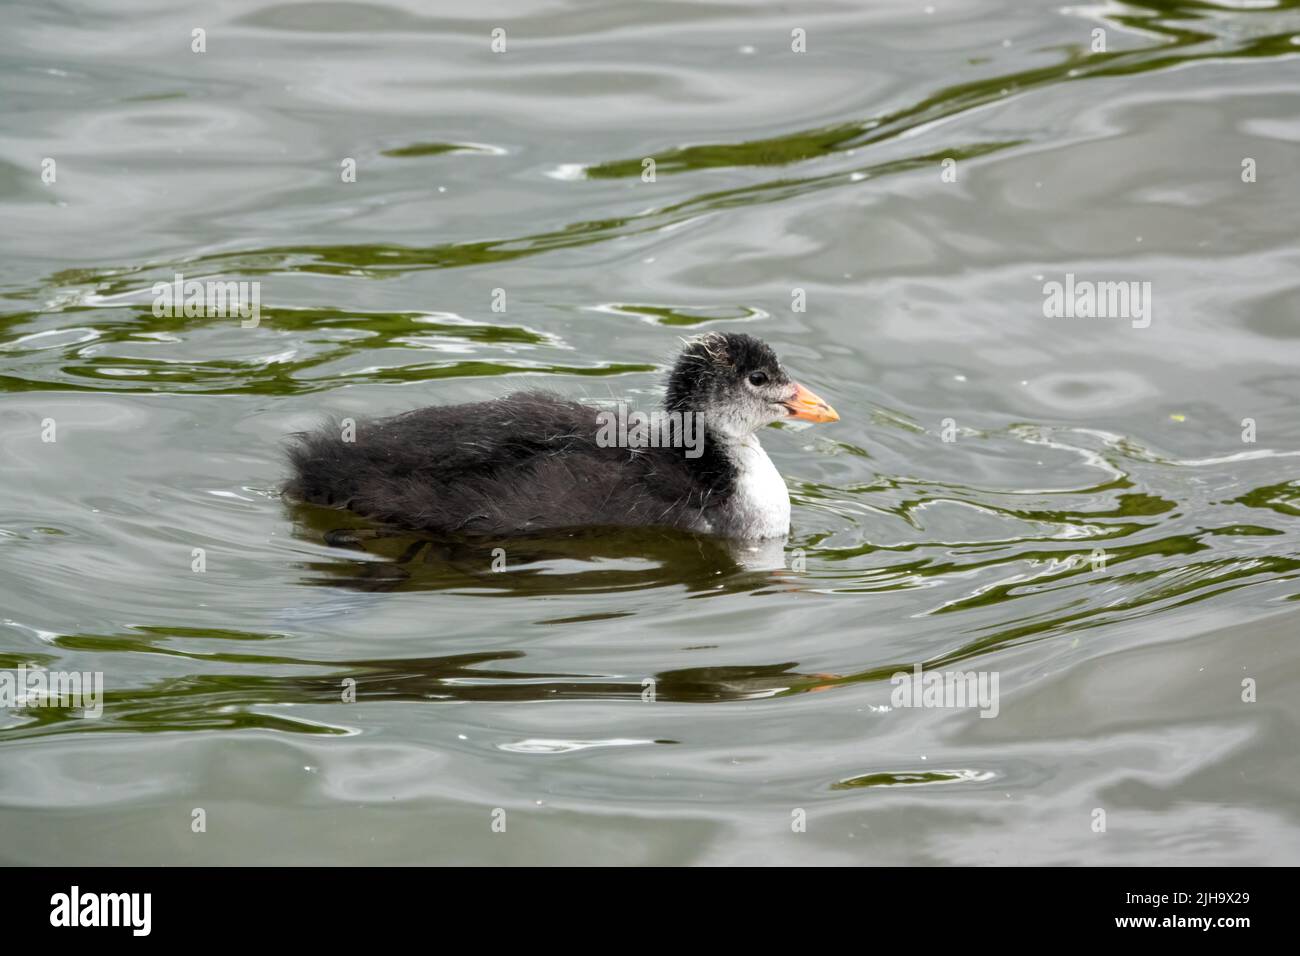 close up of a Common / Eurasian Coot chick (Fulica atra) on water Stock Photo